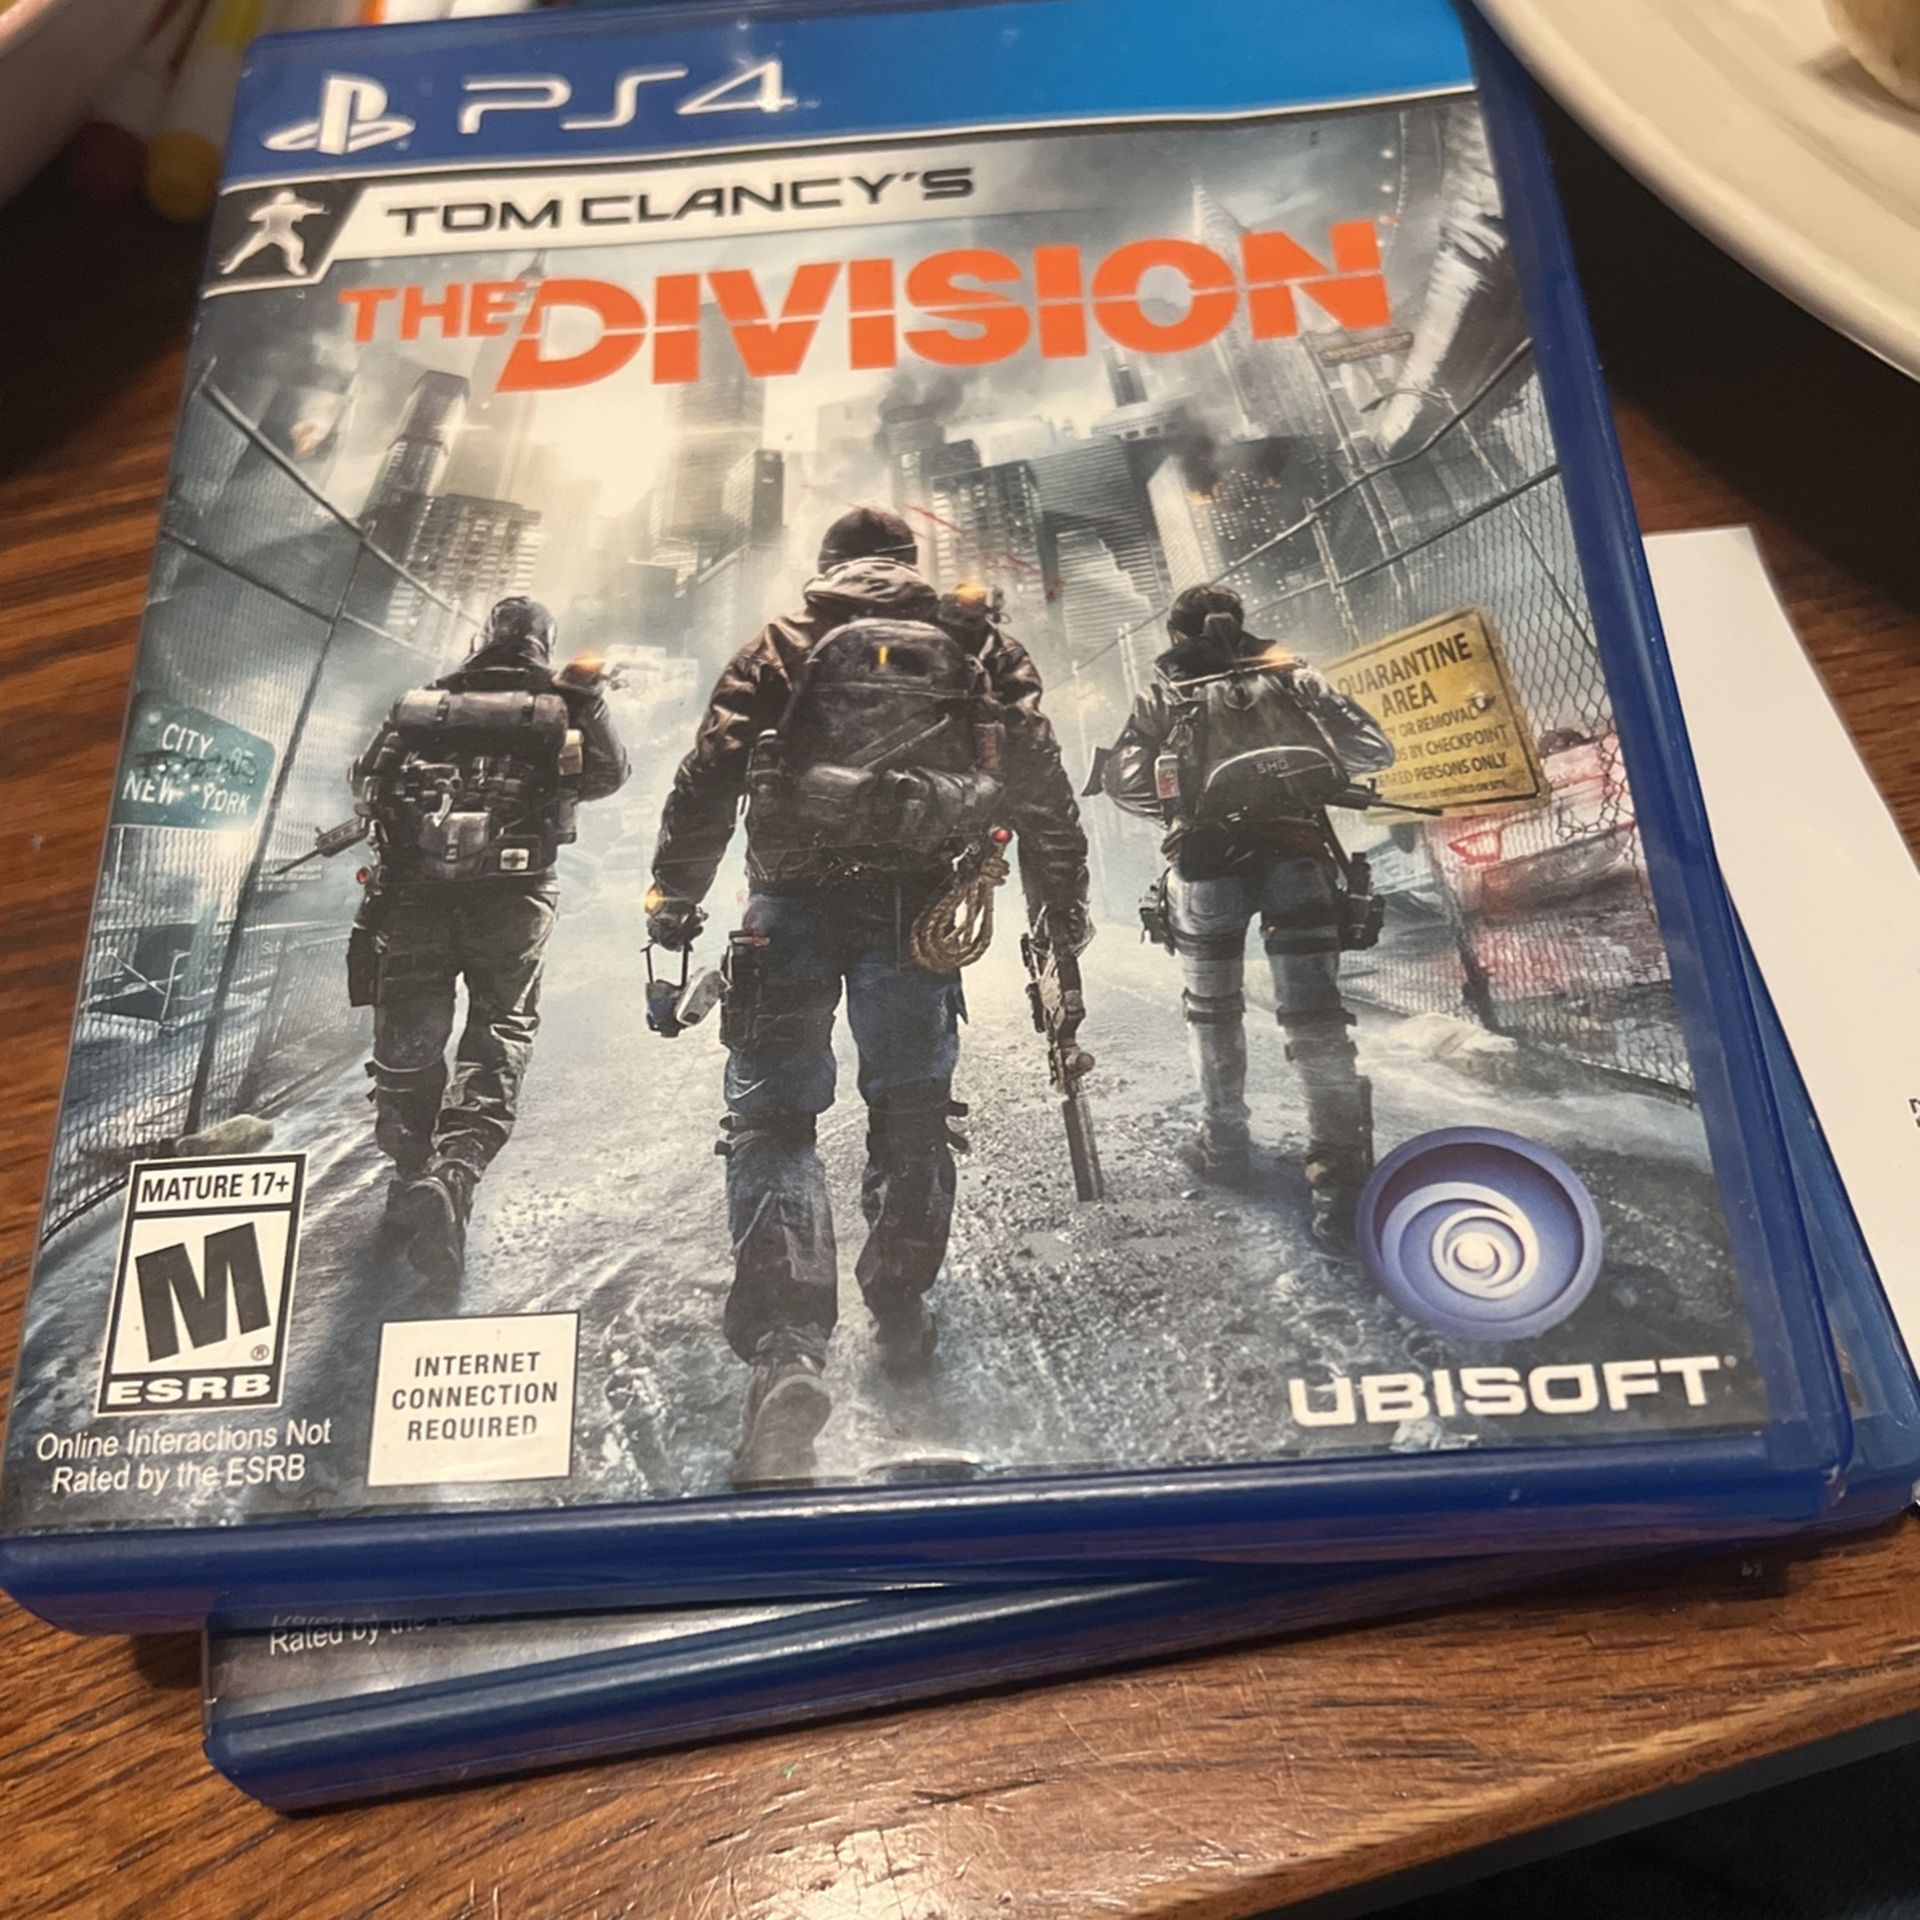 The Division PS4 Game has some scratches on it 